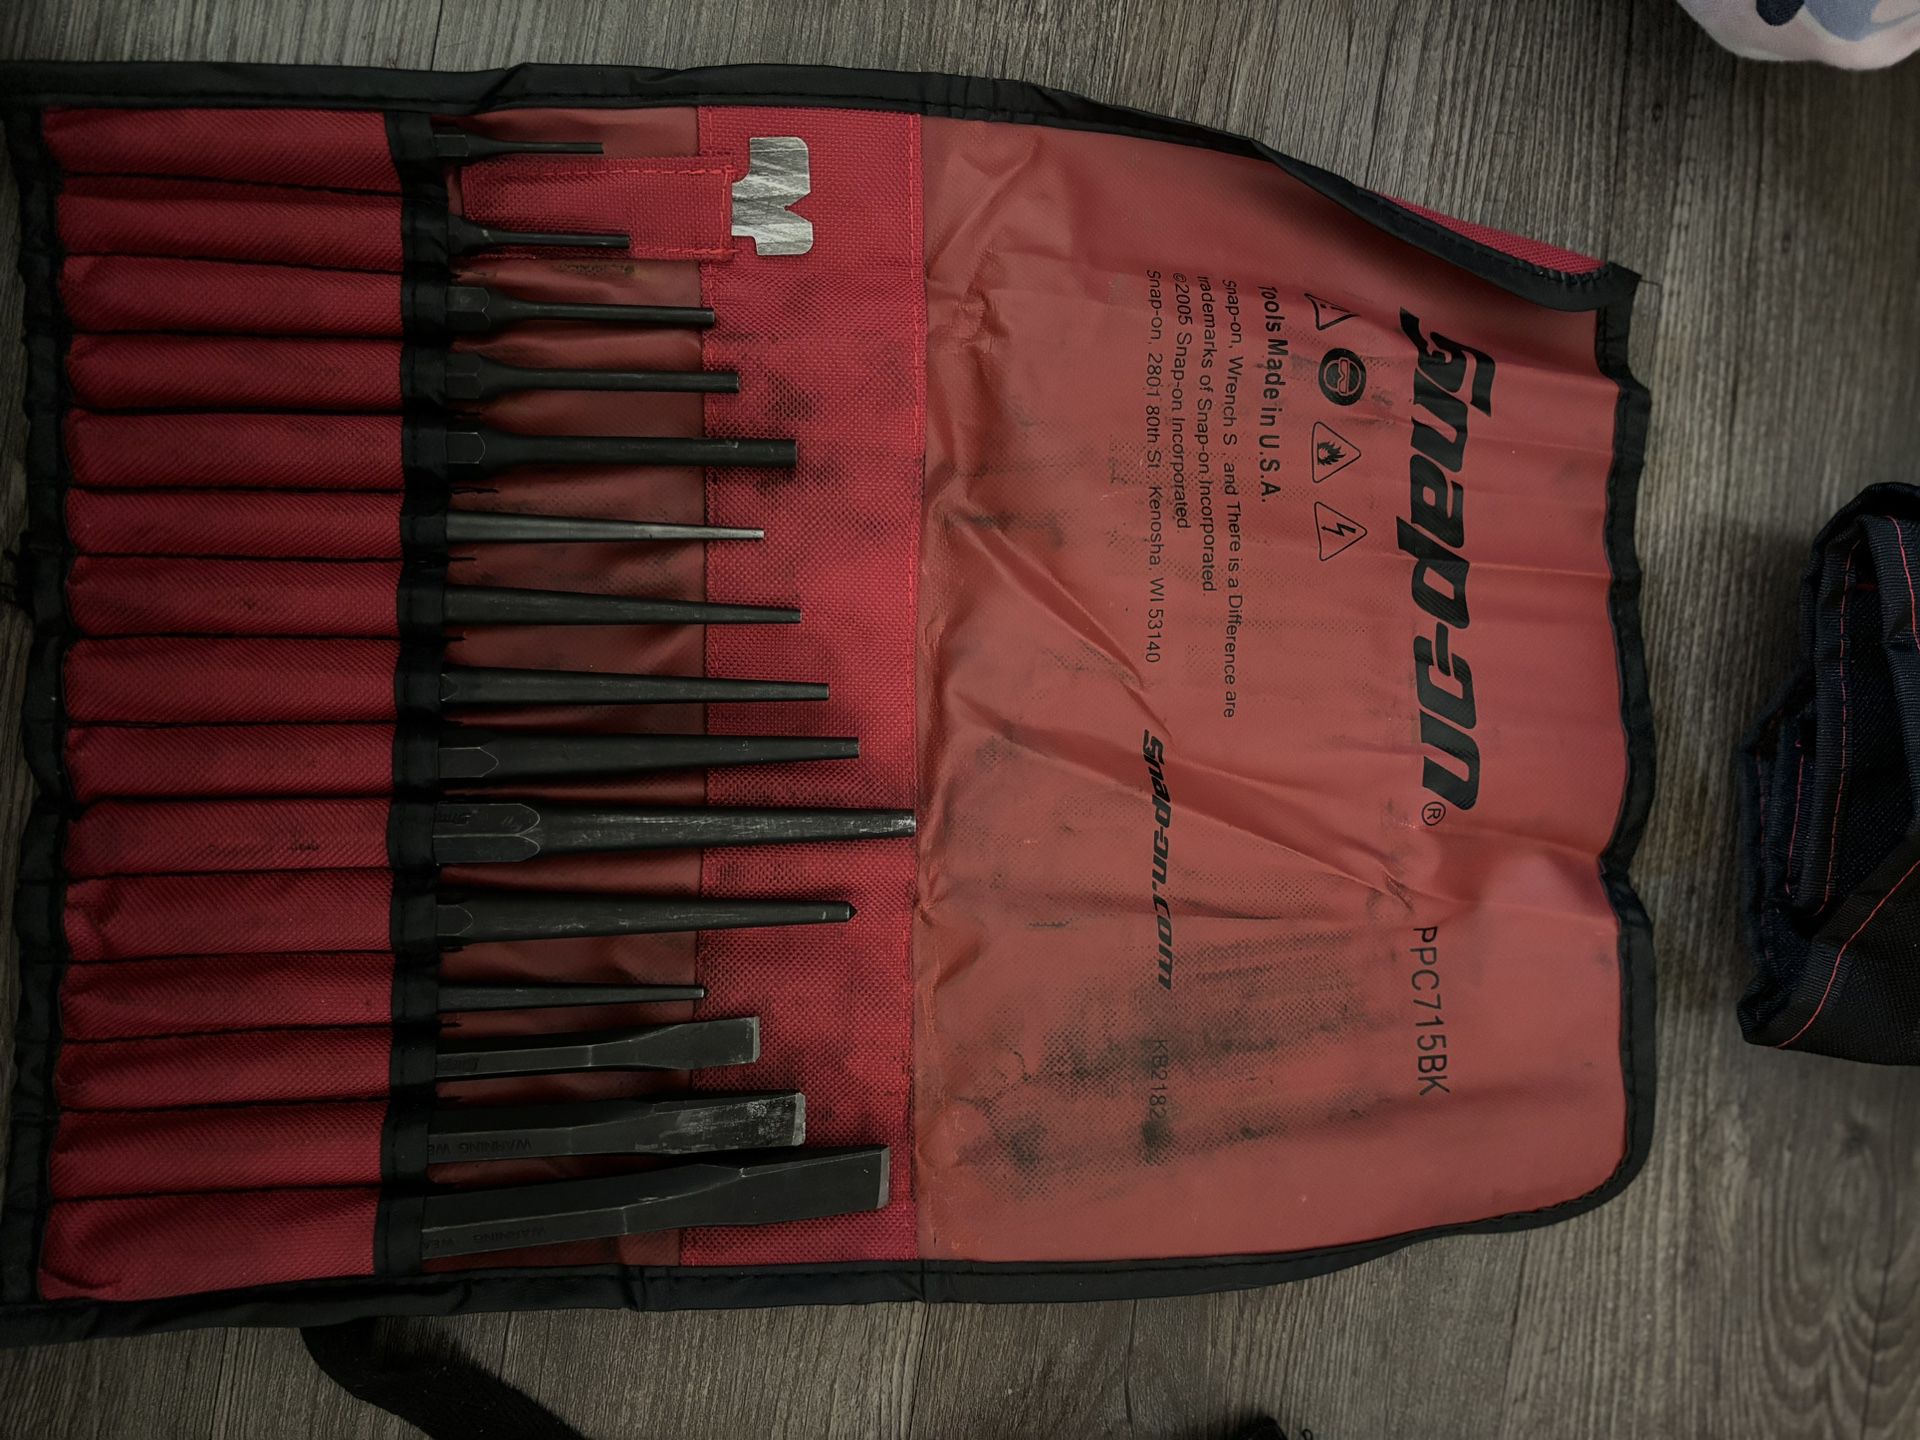 Chisel And Punch Set